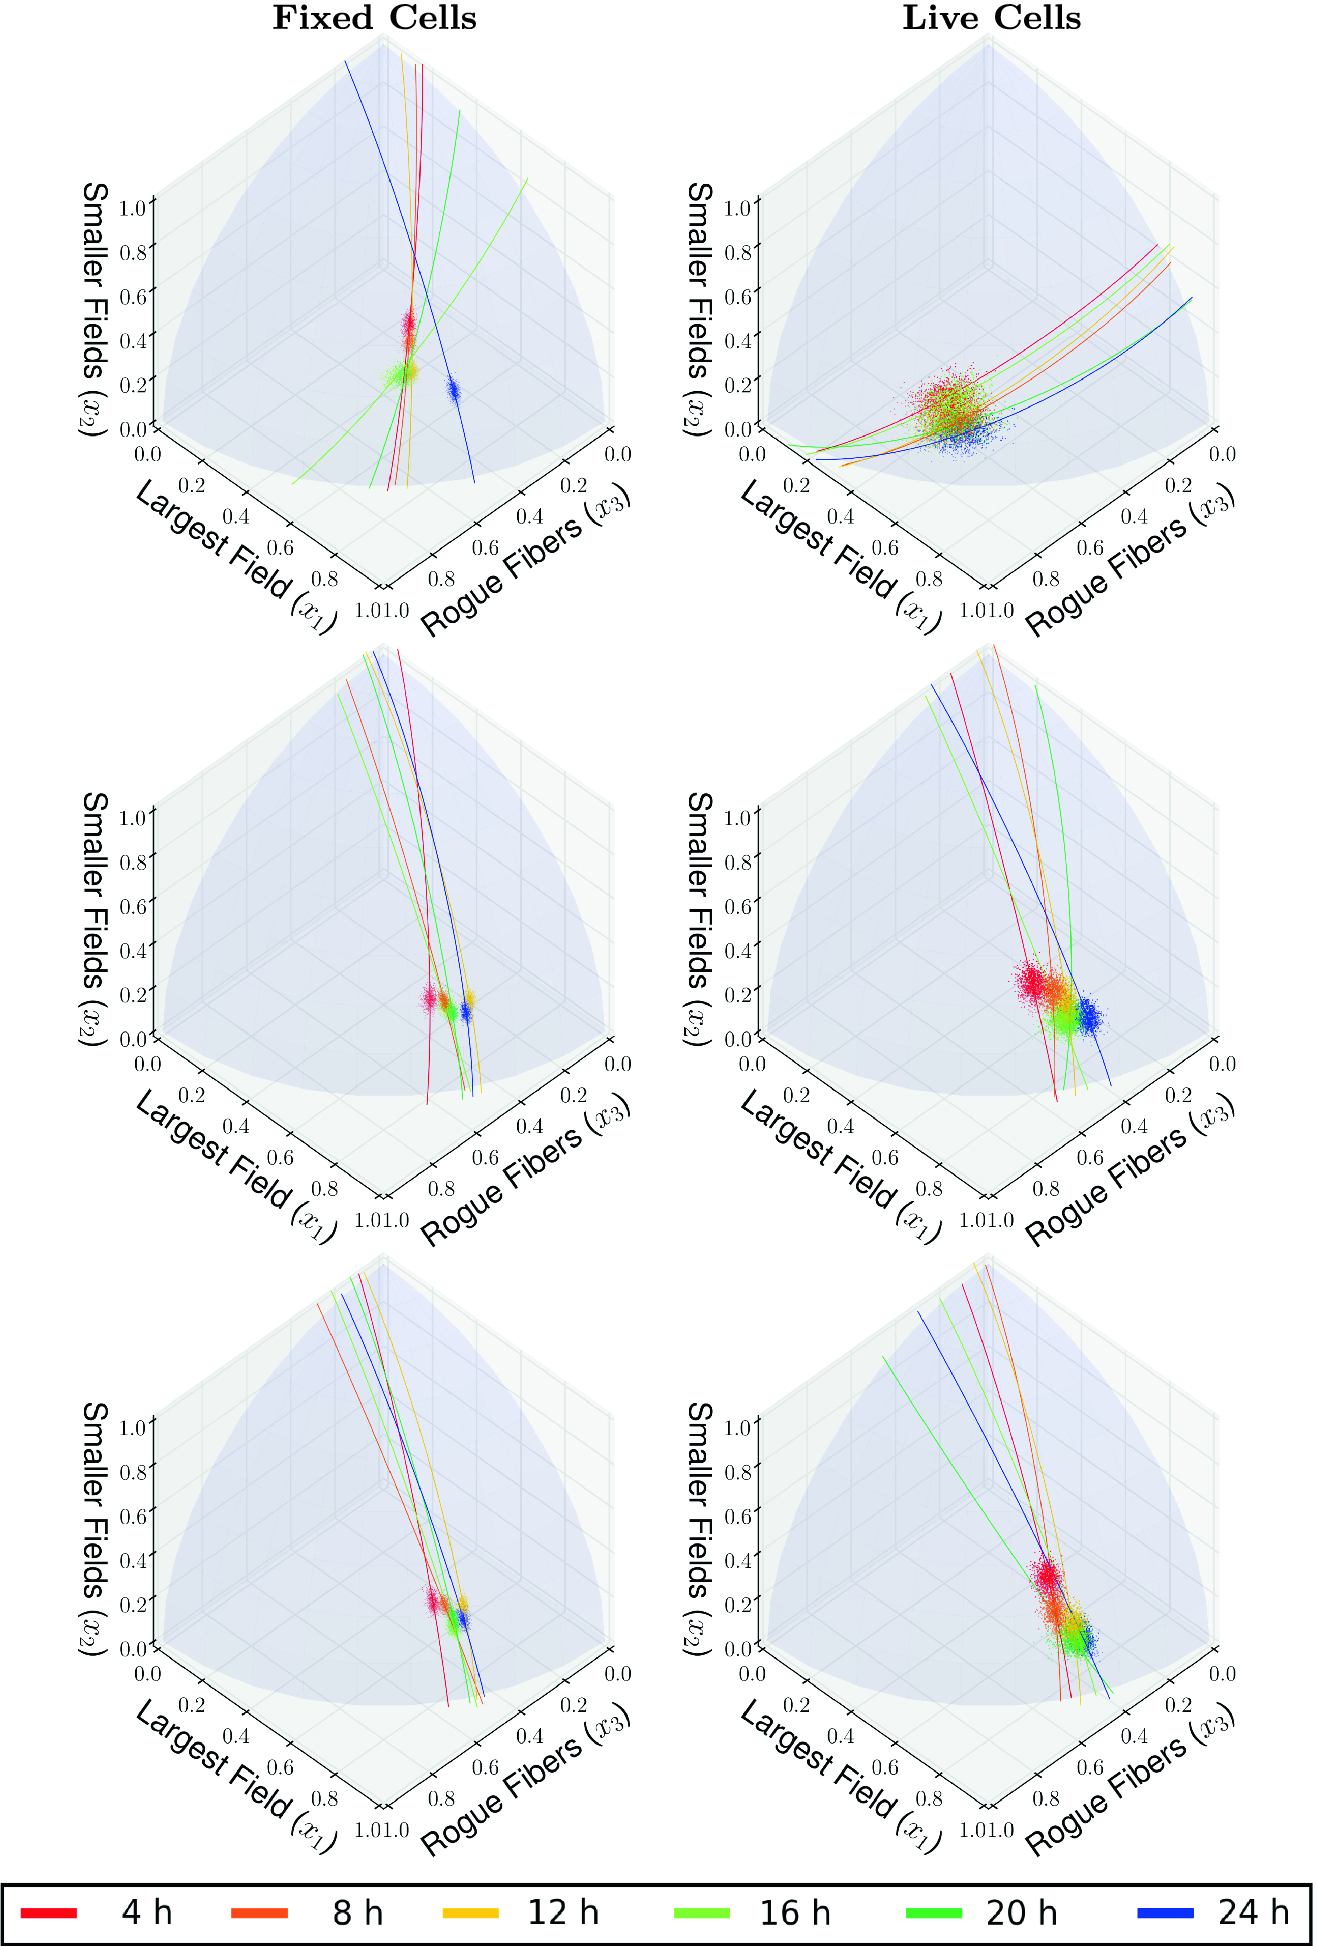 A Statistical And Biophysical Toolbox To Elucidate Structure And